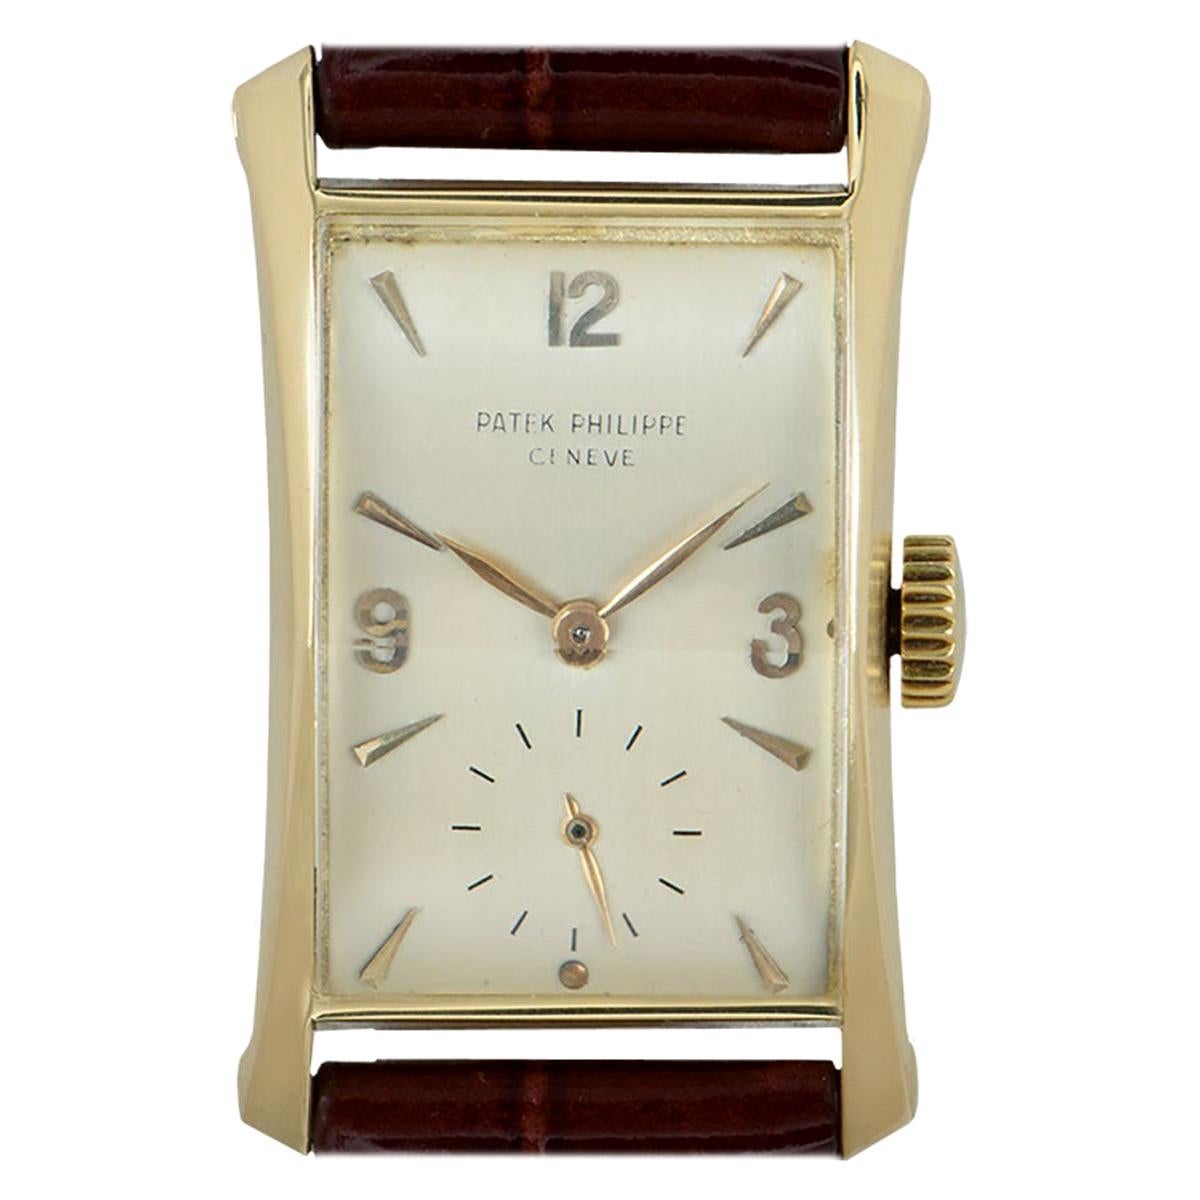 Vintage Patek Philippe Hour Glass 2468 Silver Dial Watch